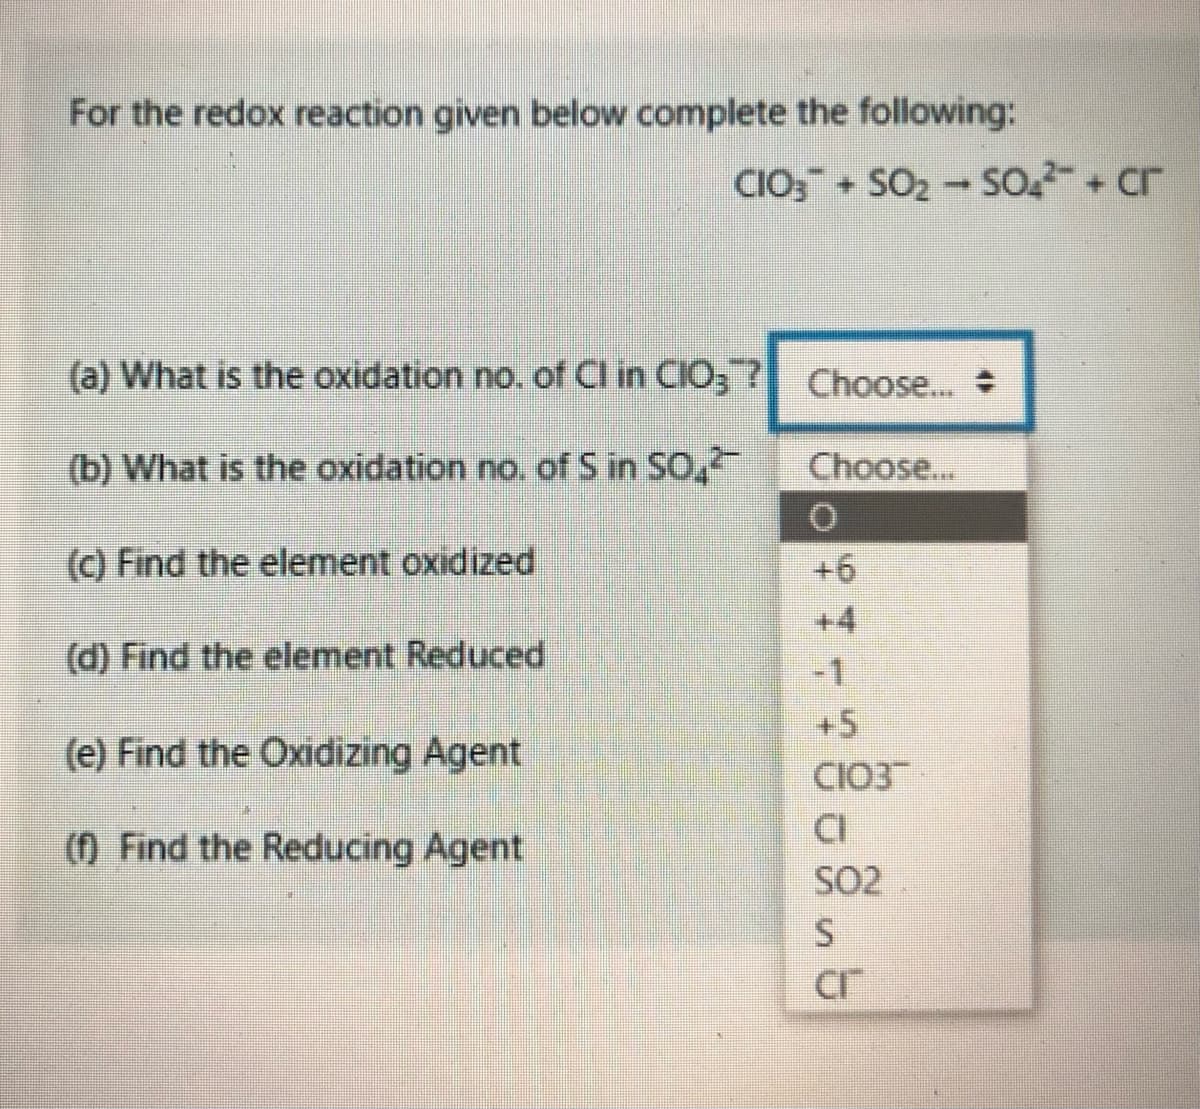 For the redox reaction given below complete the following:
CIO; + SO2 - SO + cr
(a) What is the oxidation no. of Cl in CIO3 ? Choose...
(b) What is the oxidation no. of S in SO,
Choose...
(c) Find the element oxidized
+6
+4
(d) Find the element Reduced
-1
+5
(e) Find the Oxidizing Agent
CIO3
CI
SO2
() Find the Reducing Agent
Cr
